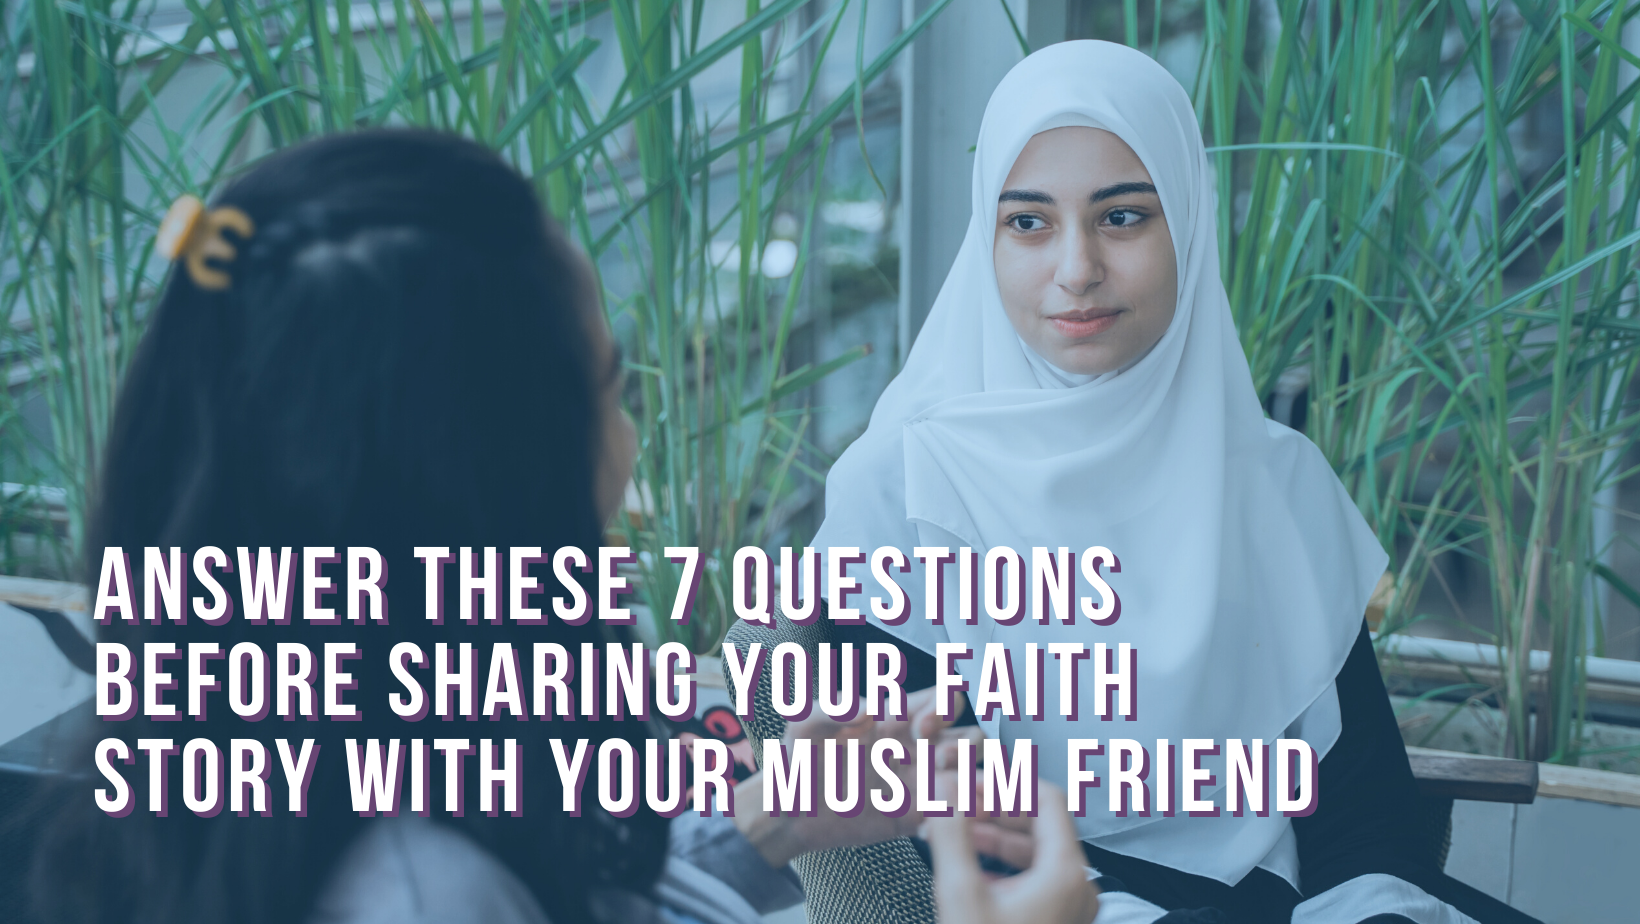 Answer these 7 questions before sharing your faith story with your Muslim friend